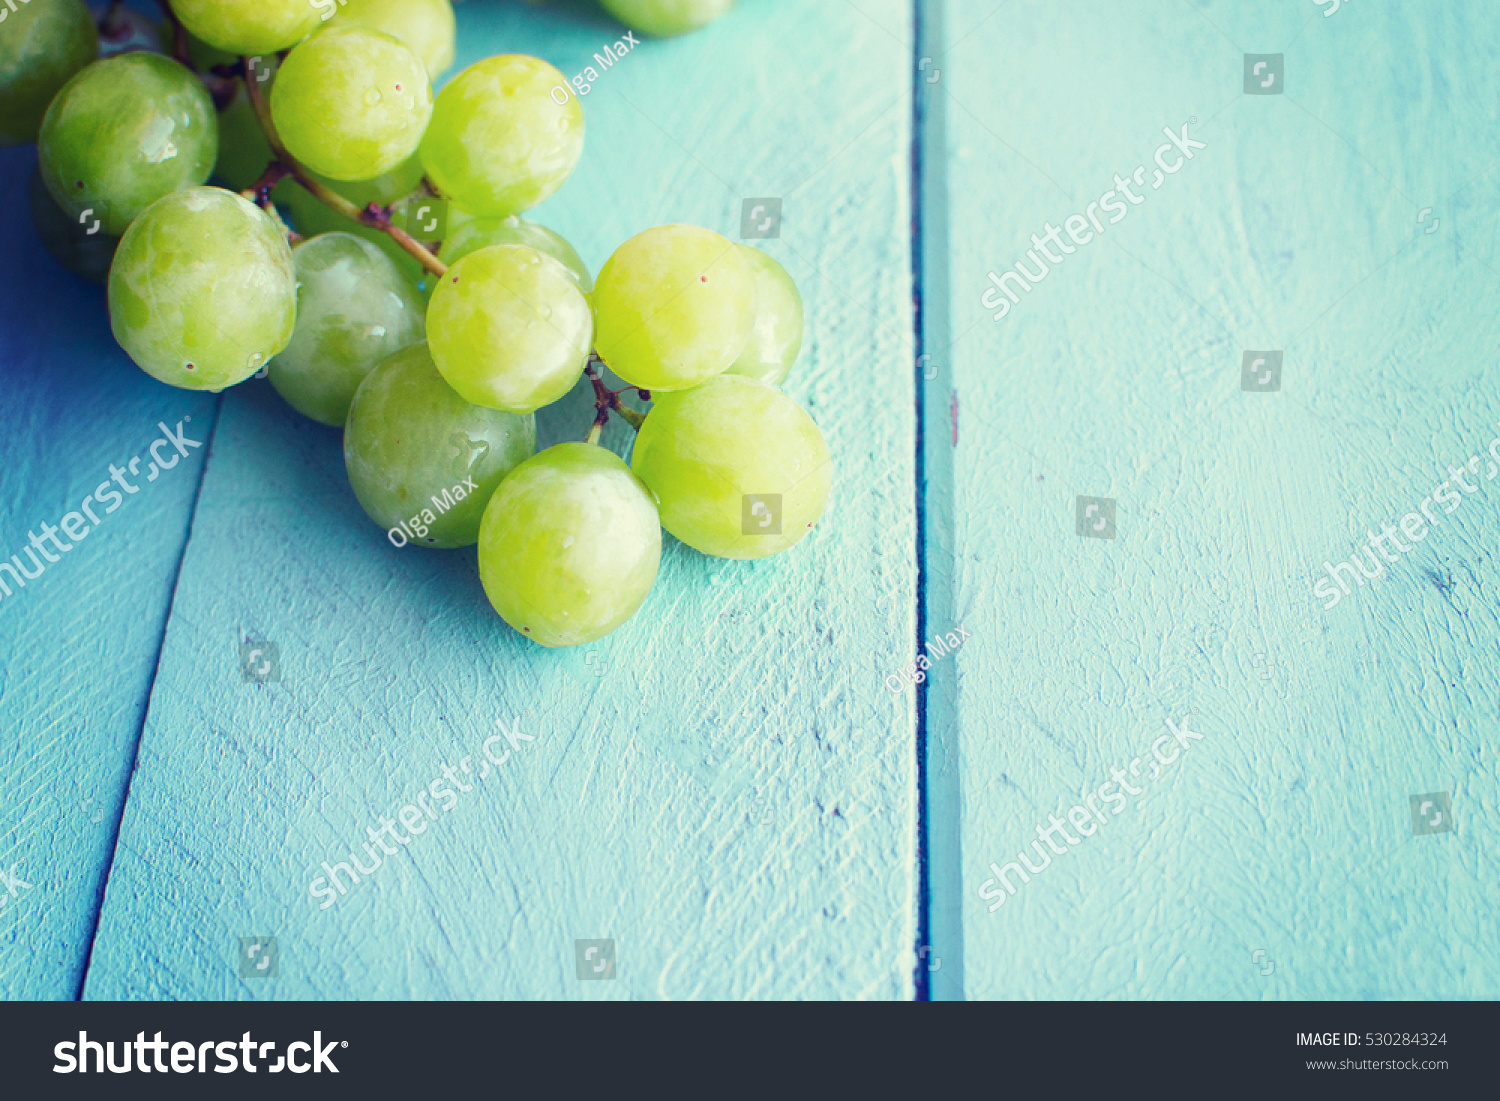 Bunch of green grapes #530284324